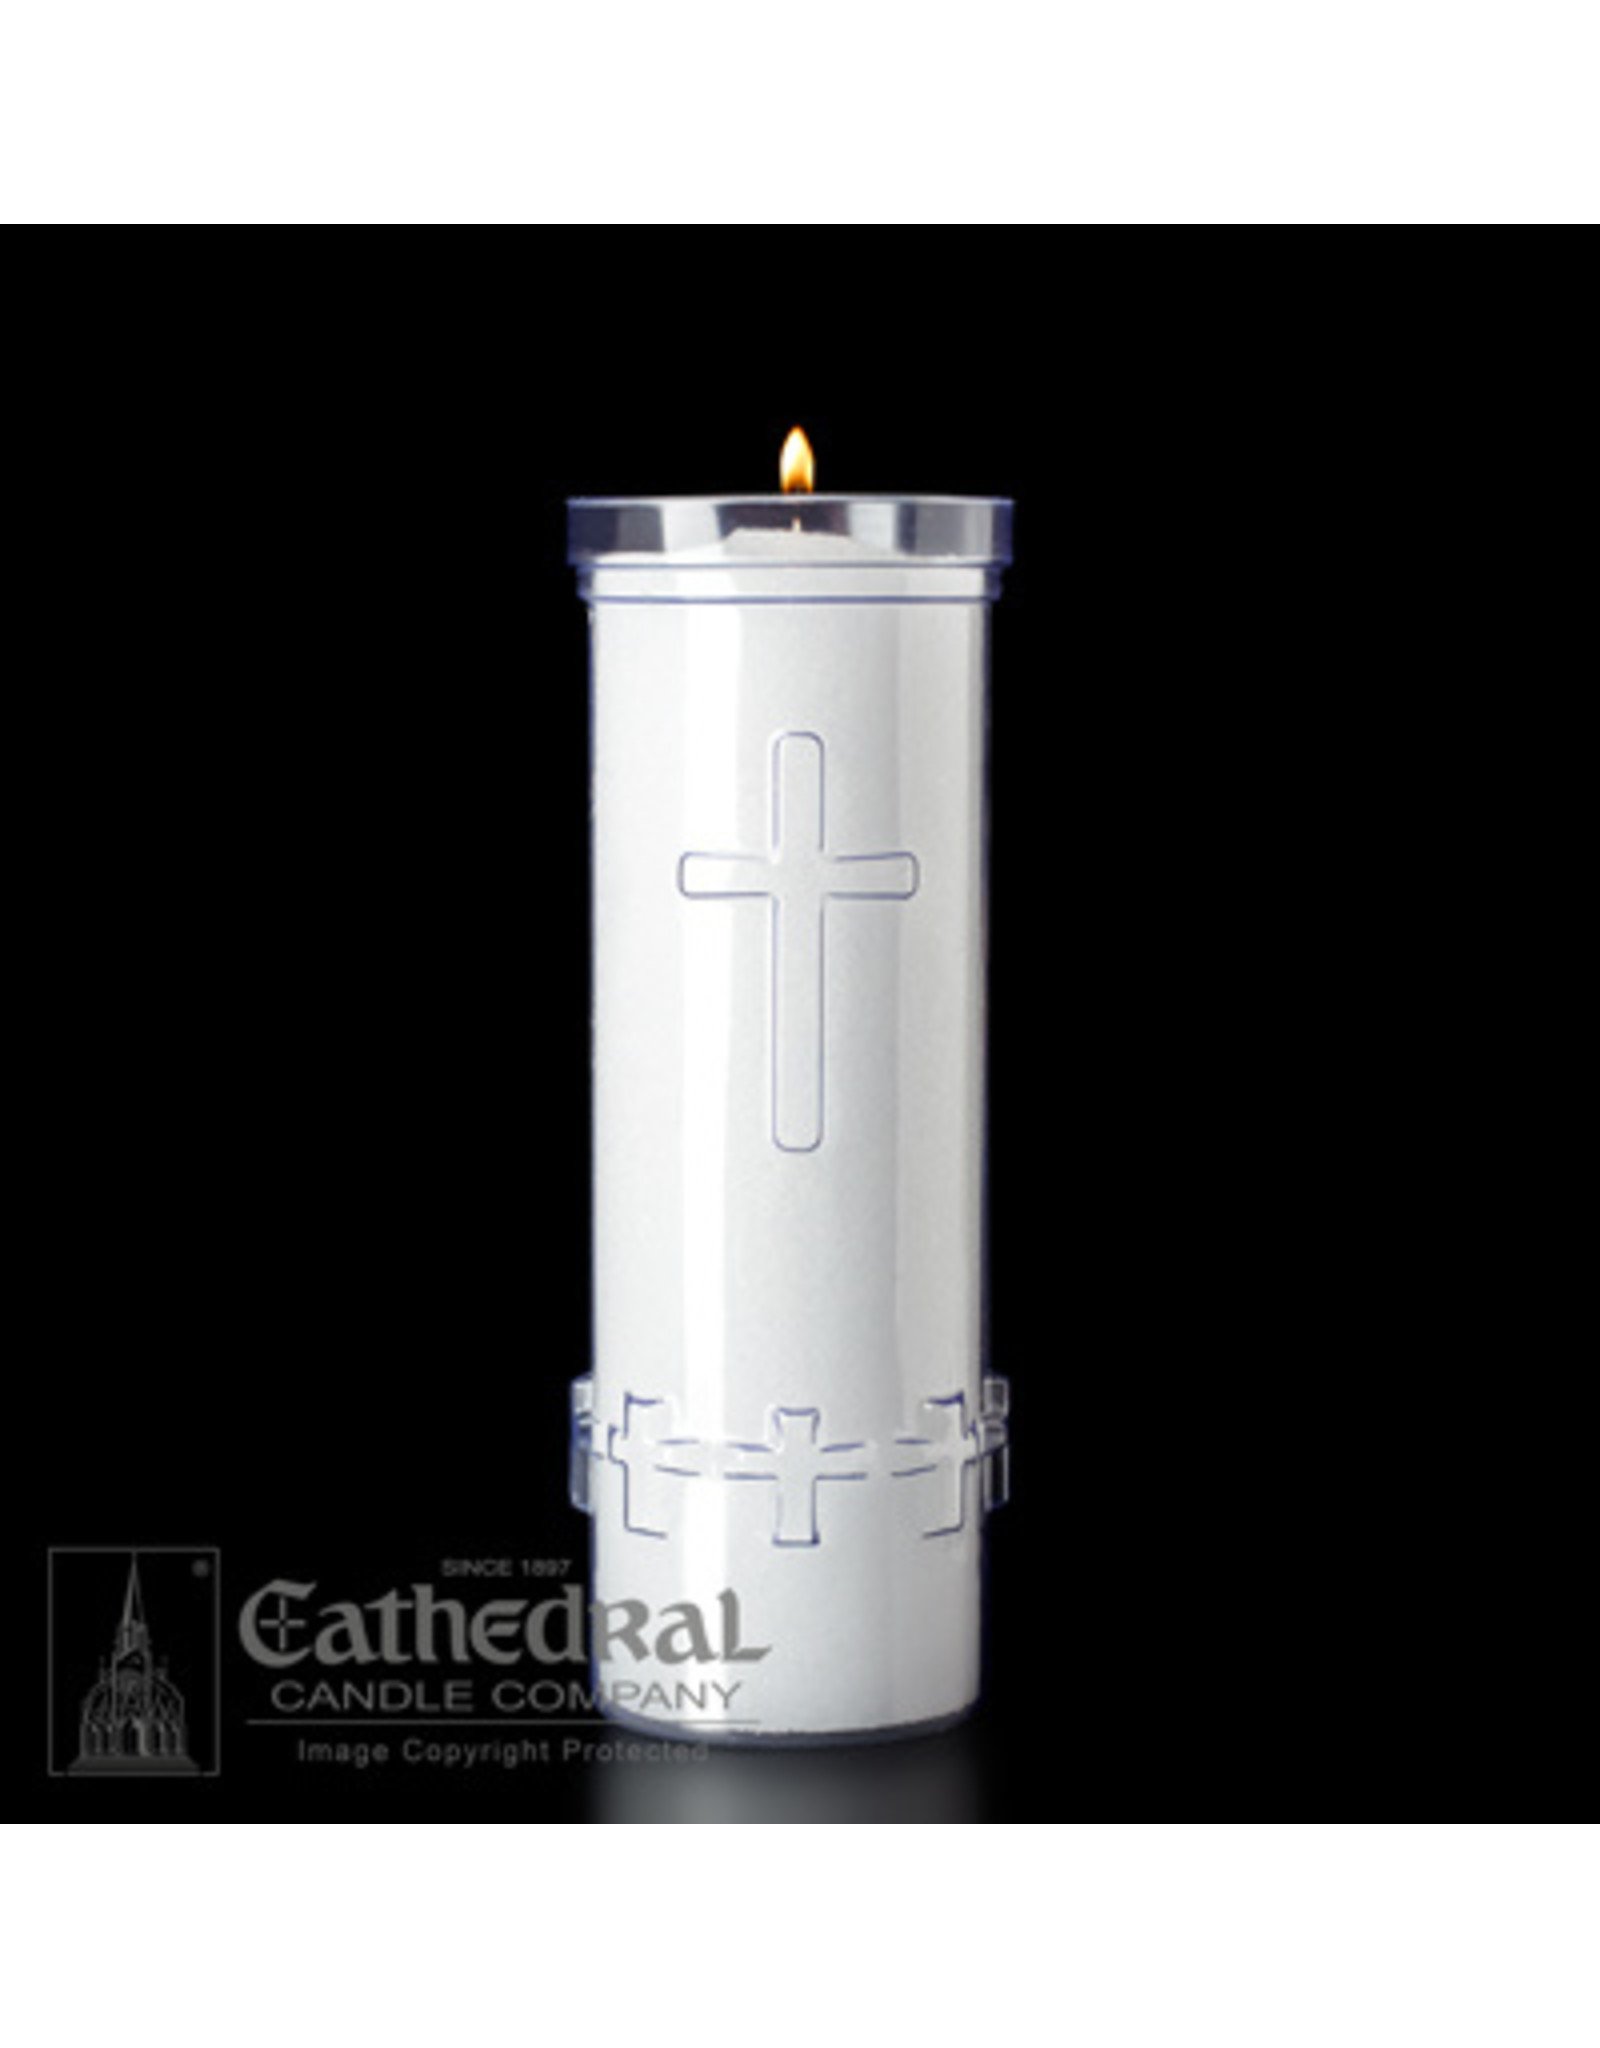 Cathedral Candle 7-Day Plastic Divine Presence Candles (24)